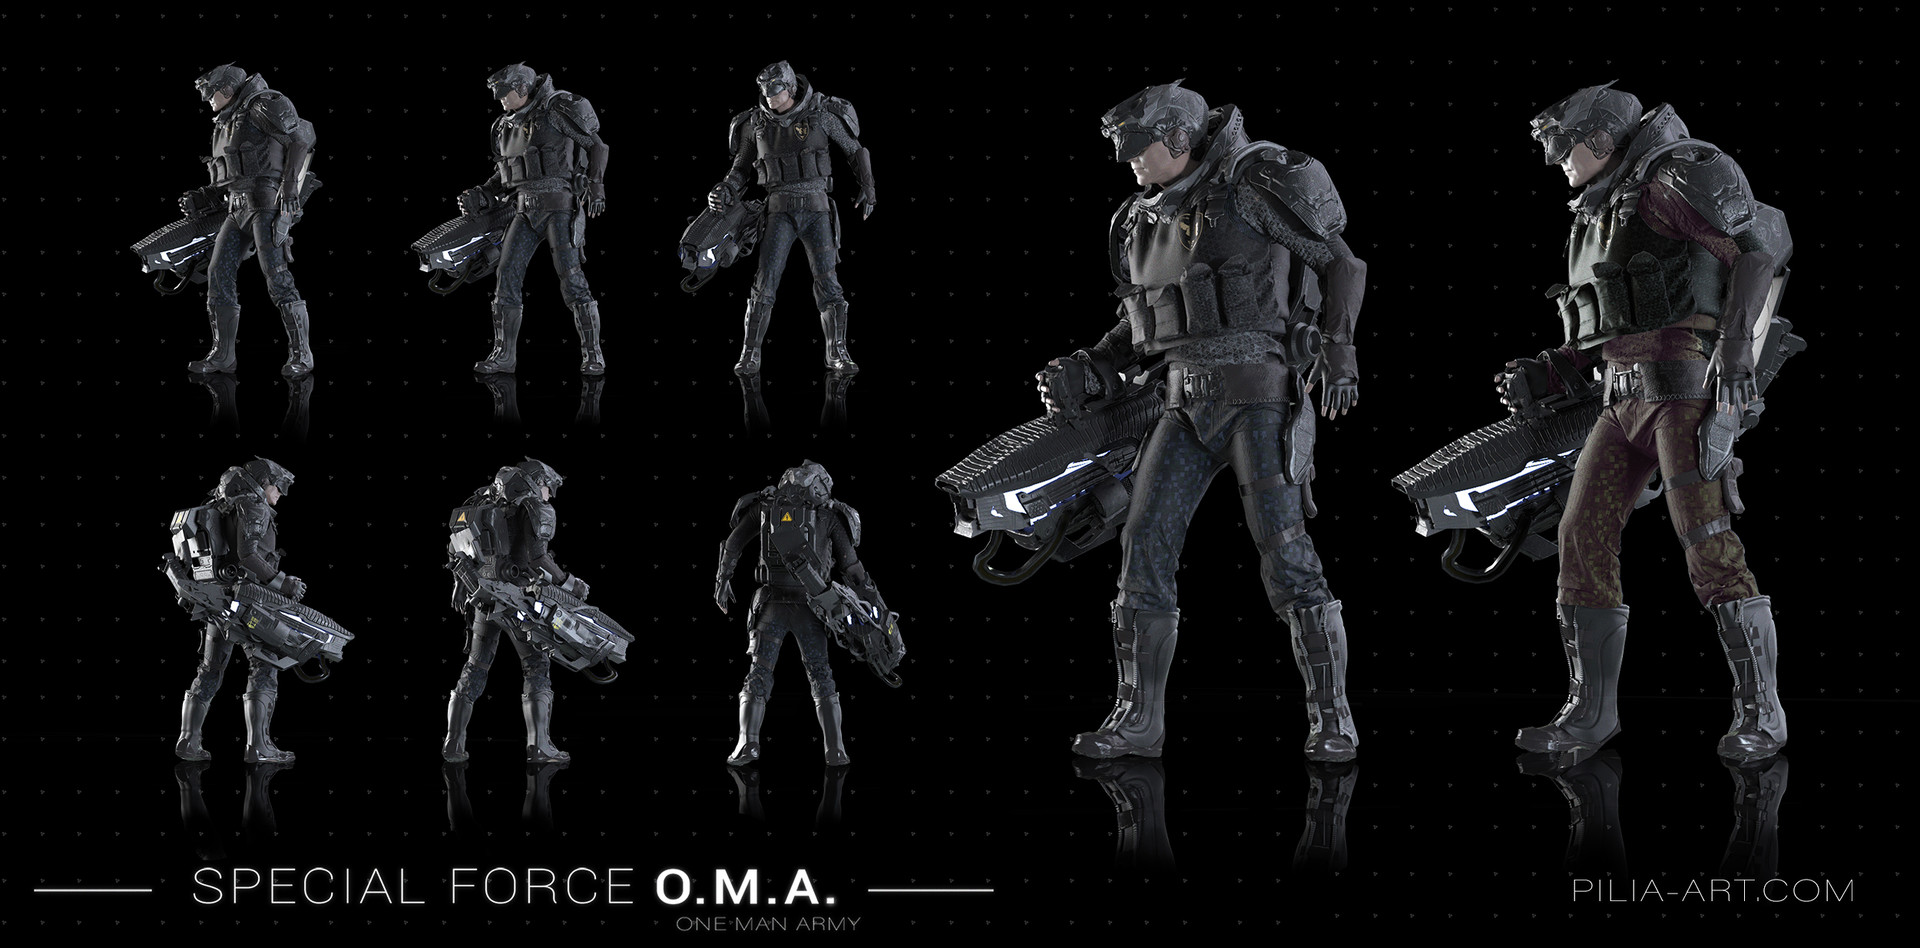 Special Force O.M.A.